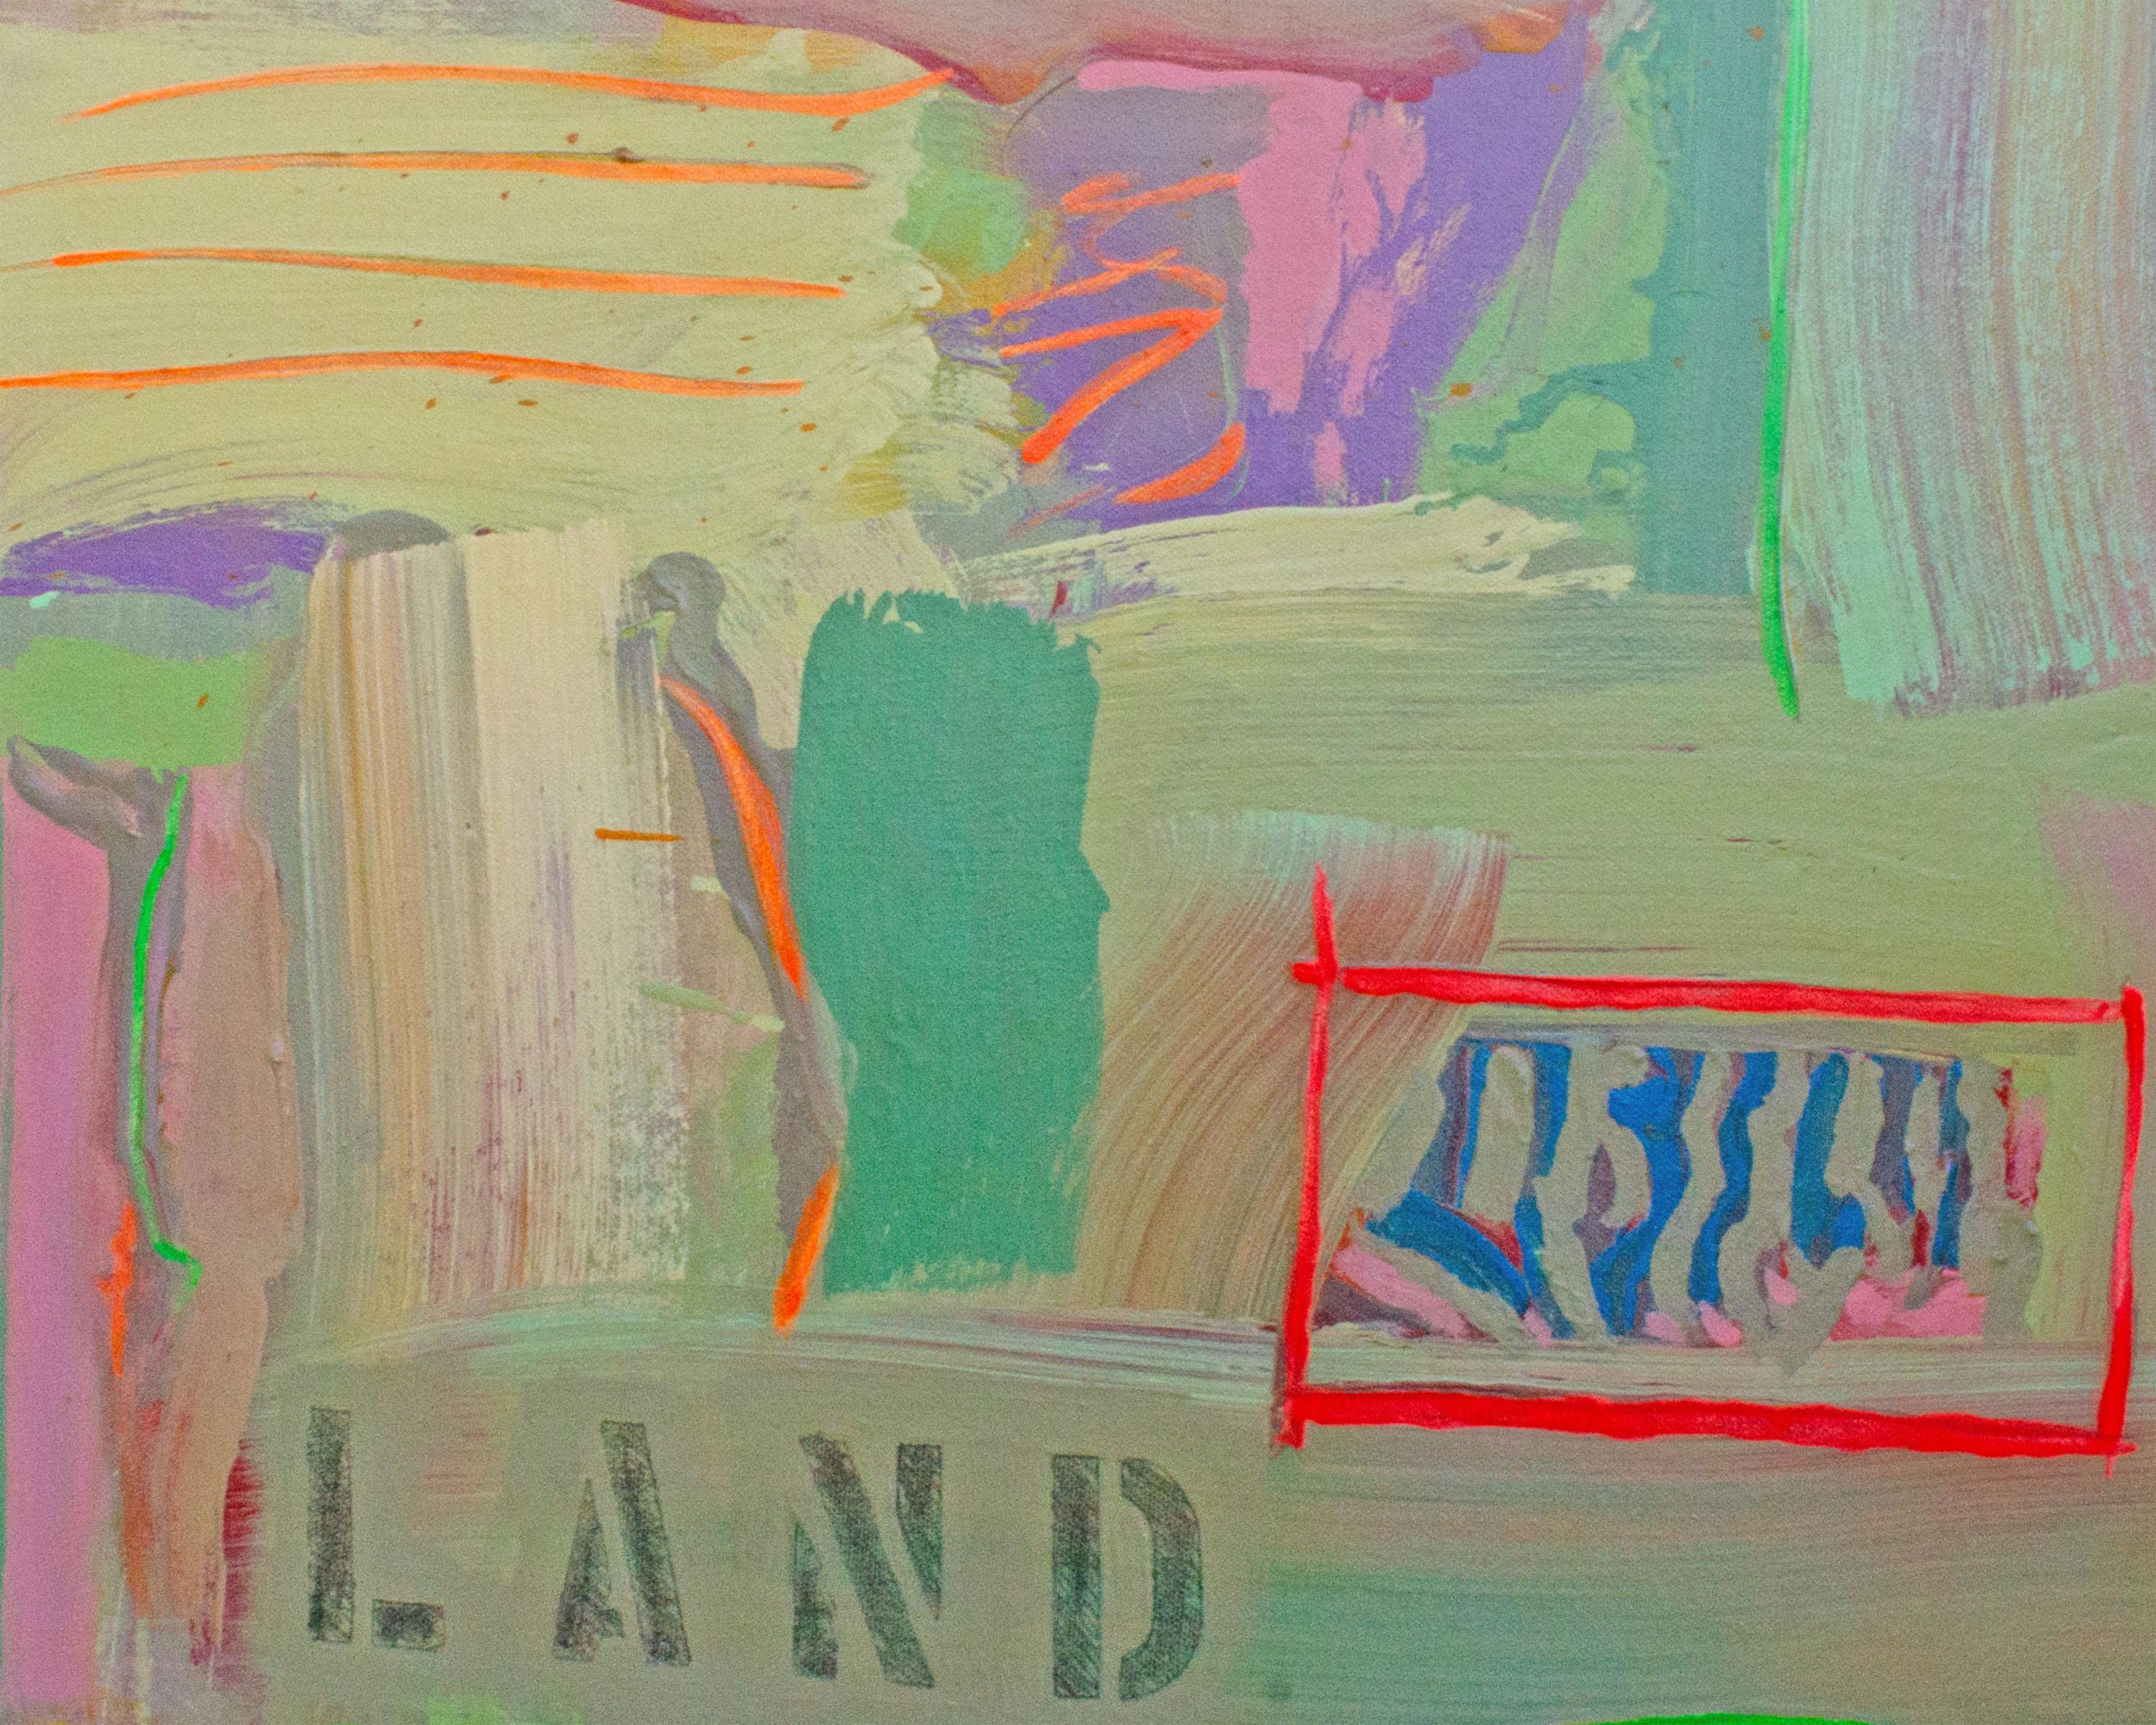 Post-Modern Harry Hilson Signed 1992 “Land Scape” Acrylic and Collage Abstract Painting For Sale